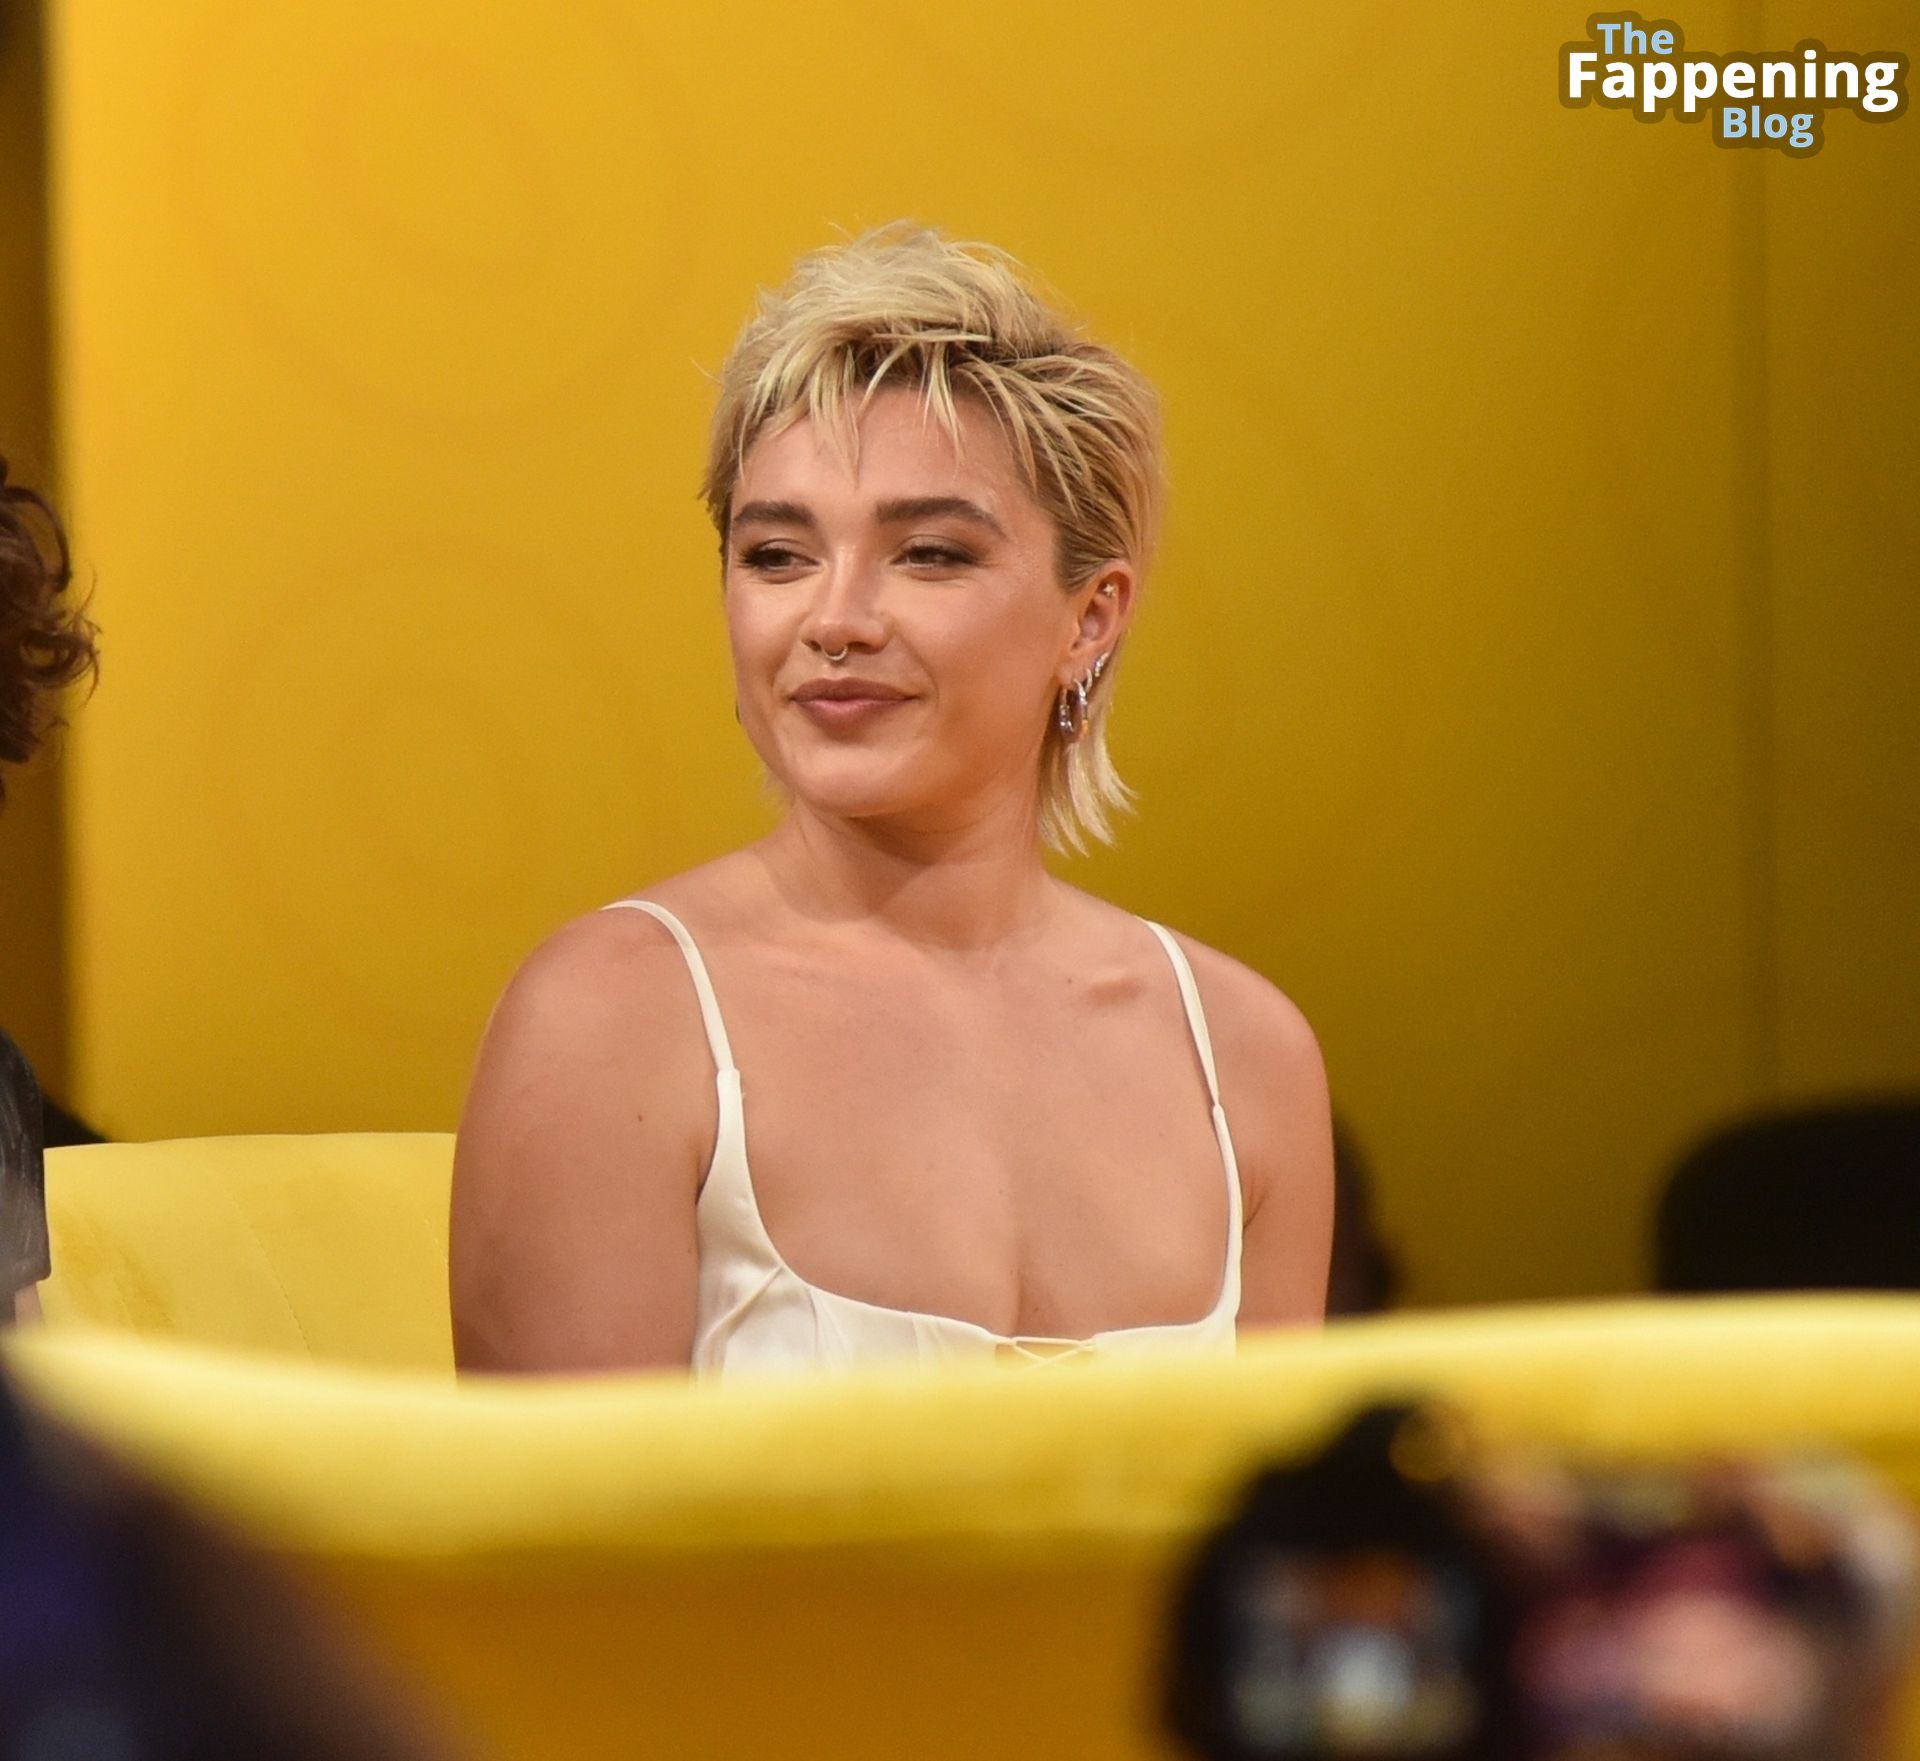 Florence-Pugh-Sexy-2-The-Fappening-Blog.jpg